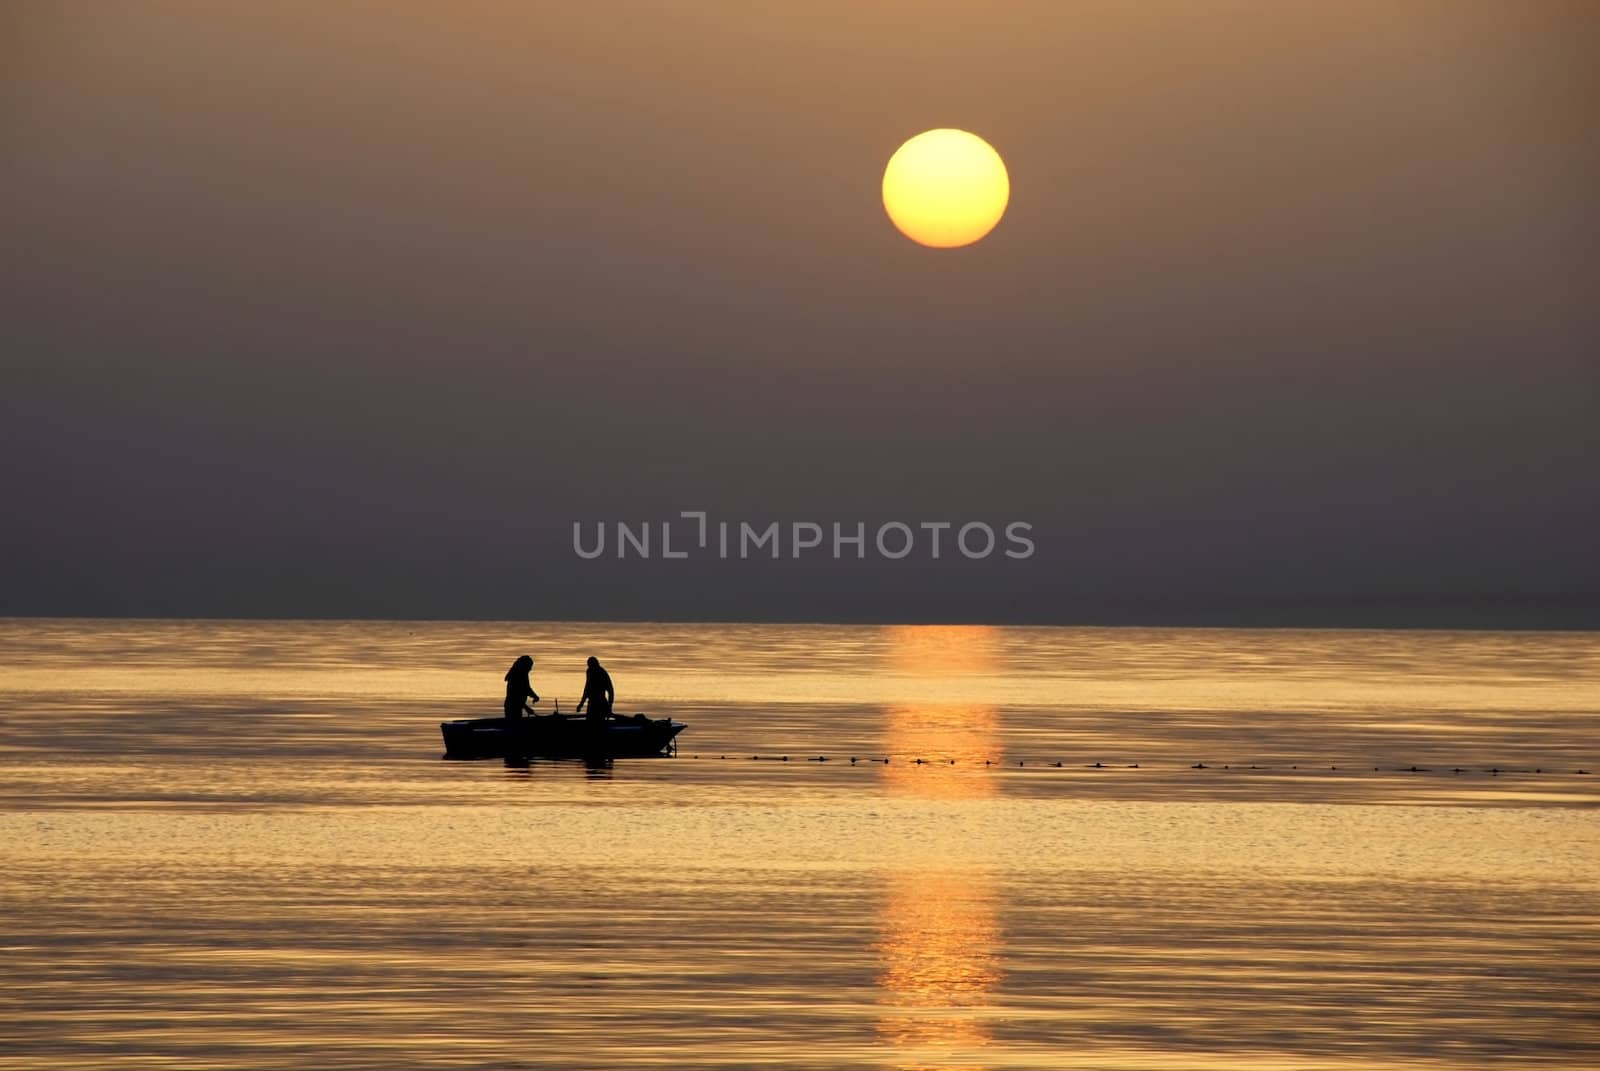 silhouettes of two fishermen fishing in boat on sea at gorgeous sunrise in Tunisia